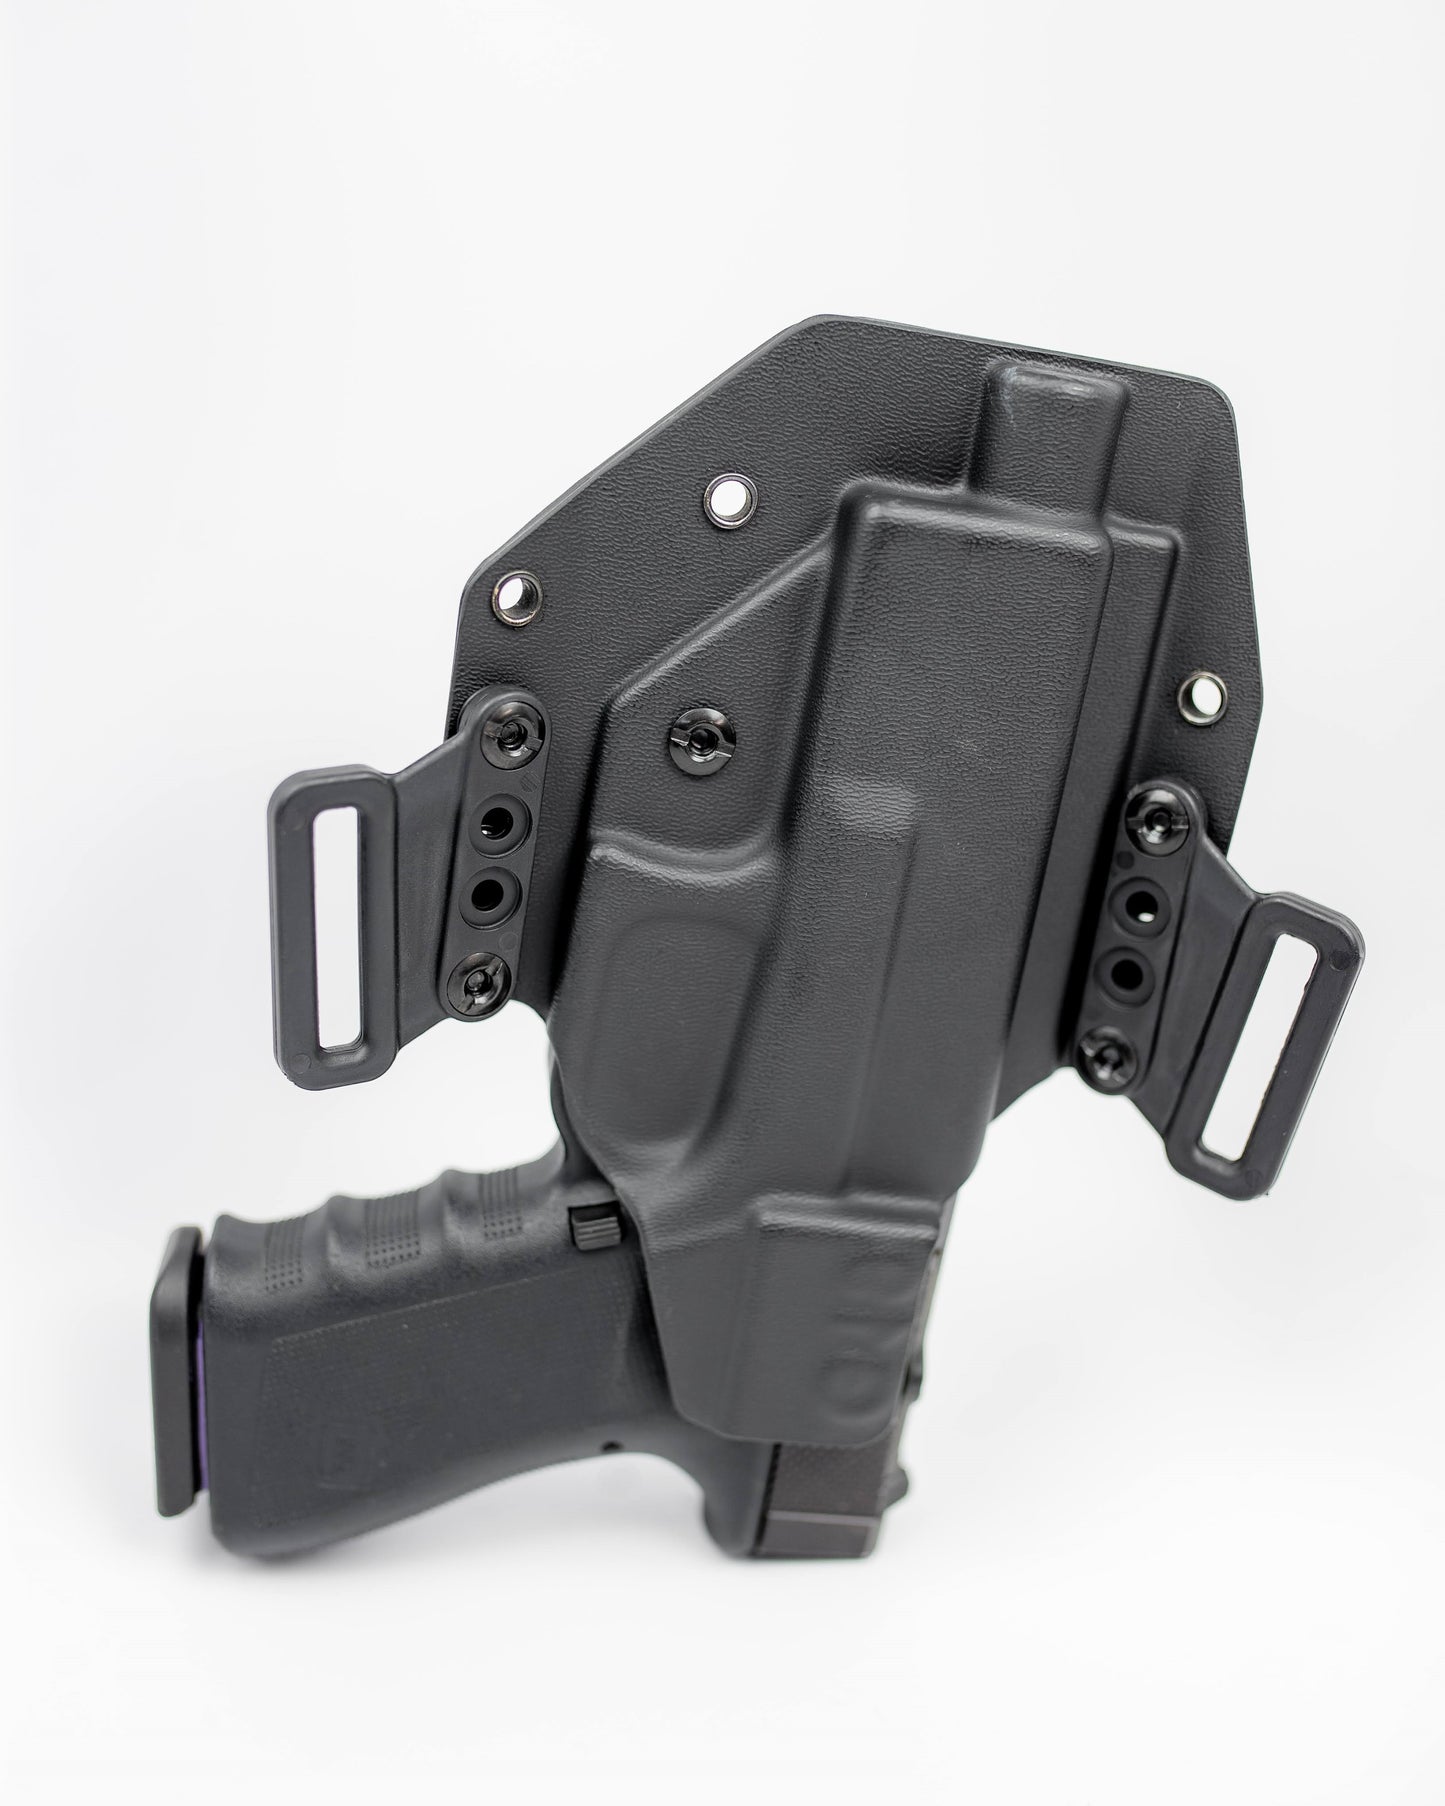 Glock 19 OWB Holster (19, 19X, 23, 32, 44, and 45)